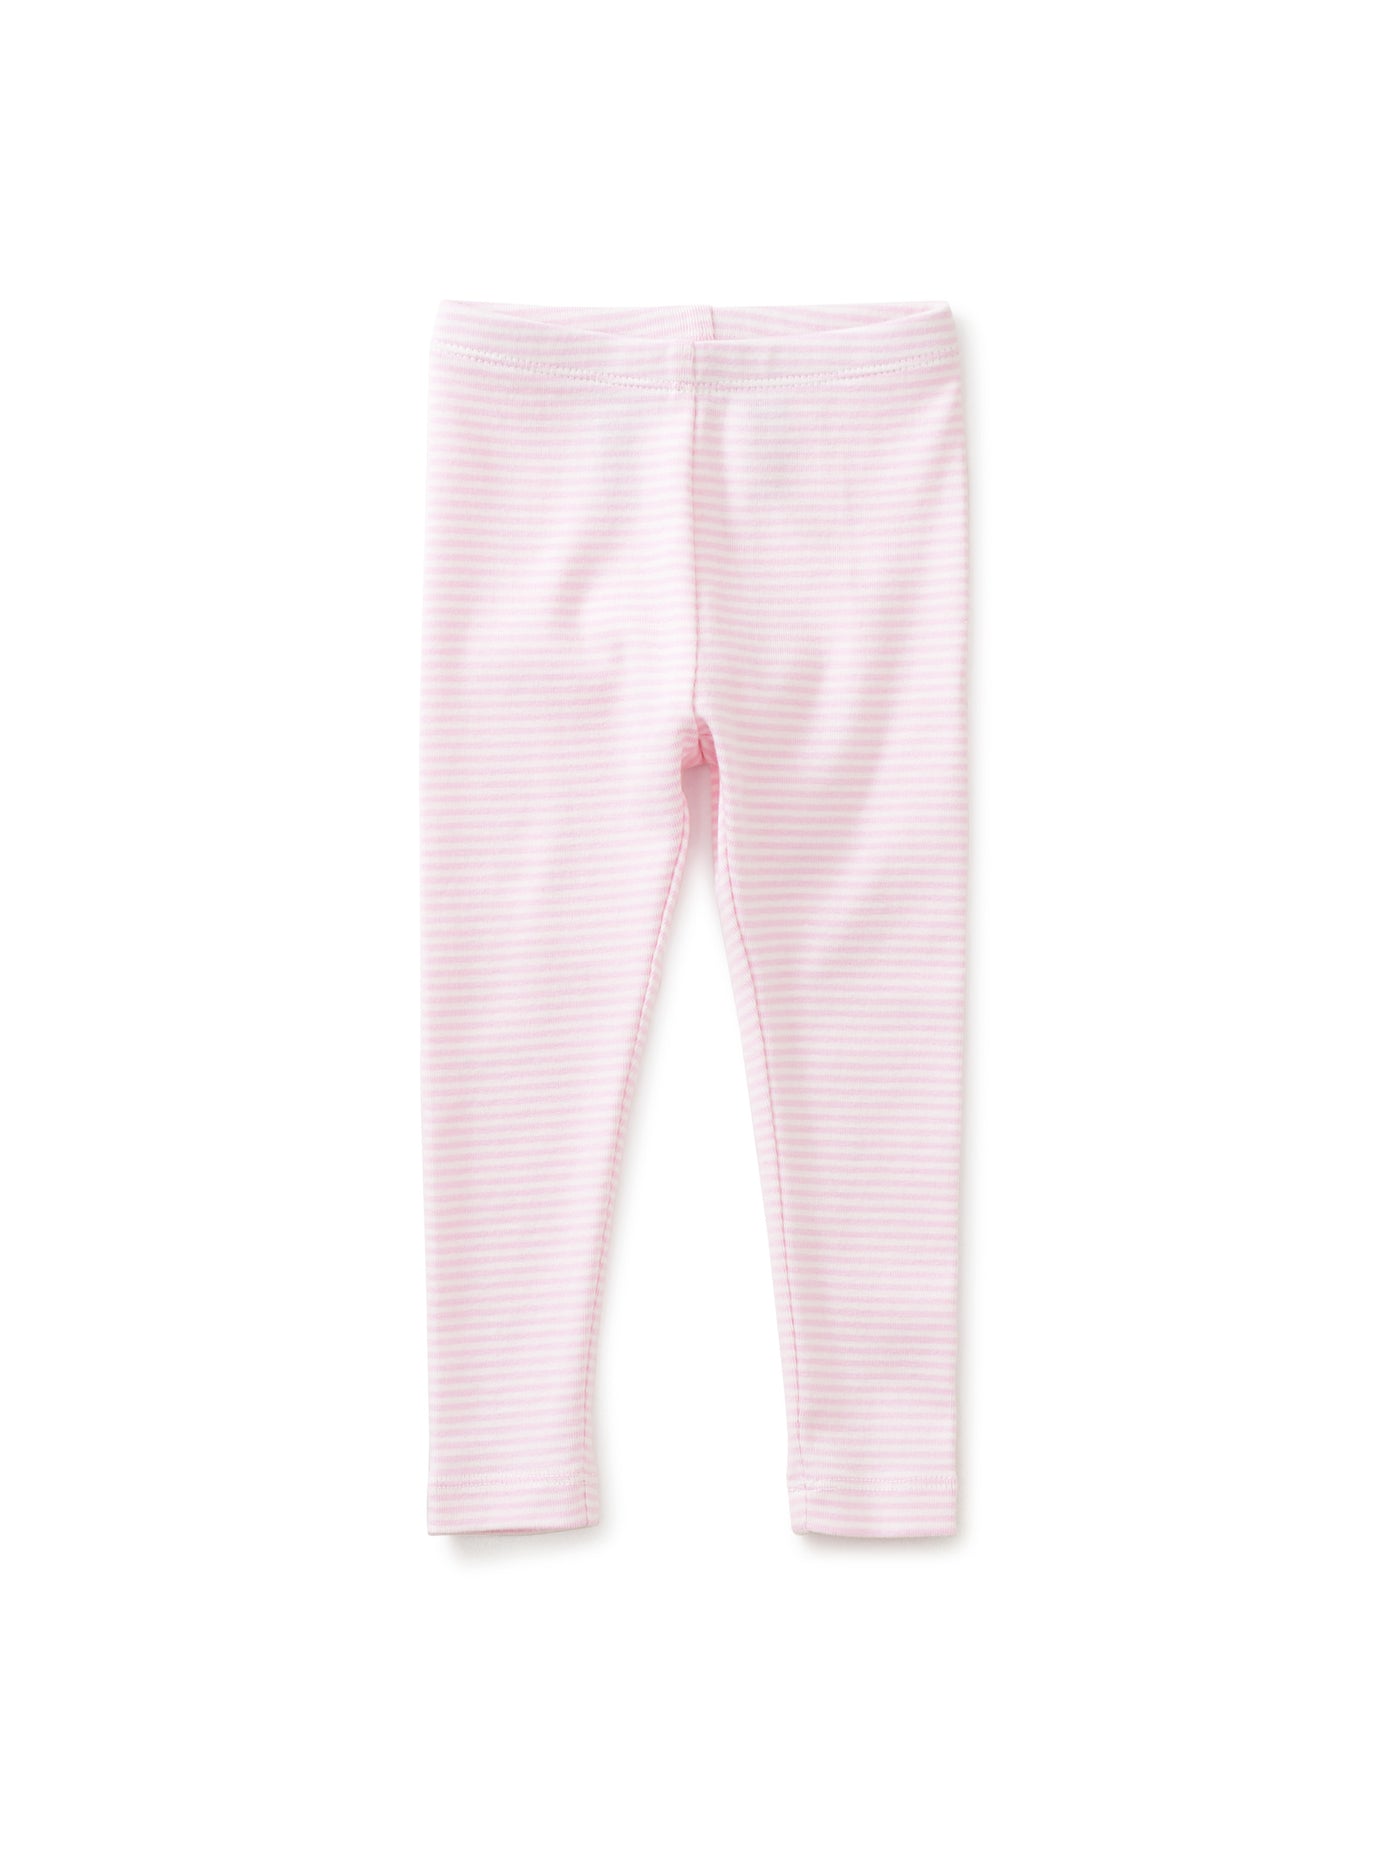 Striped Baby Leggings in Pink Lady